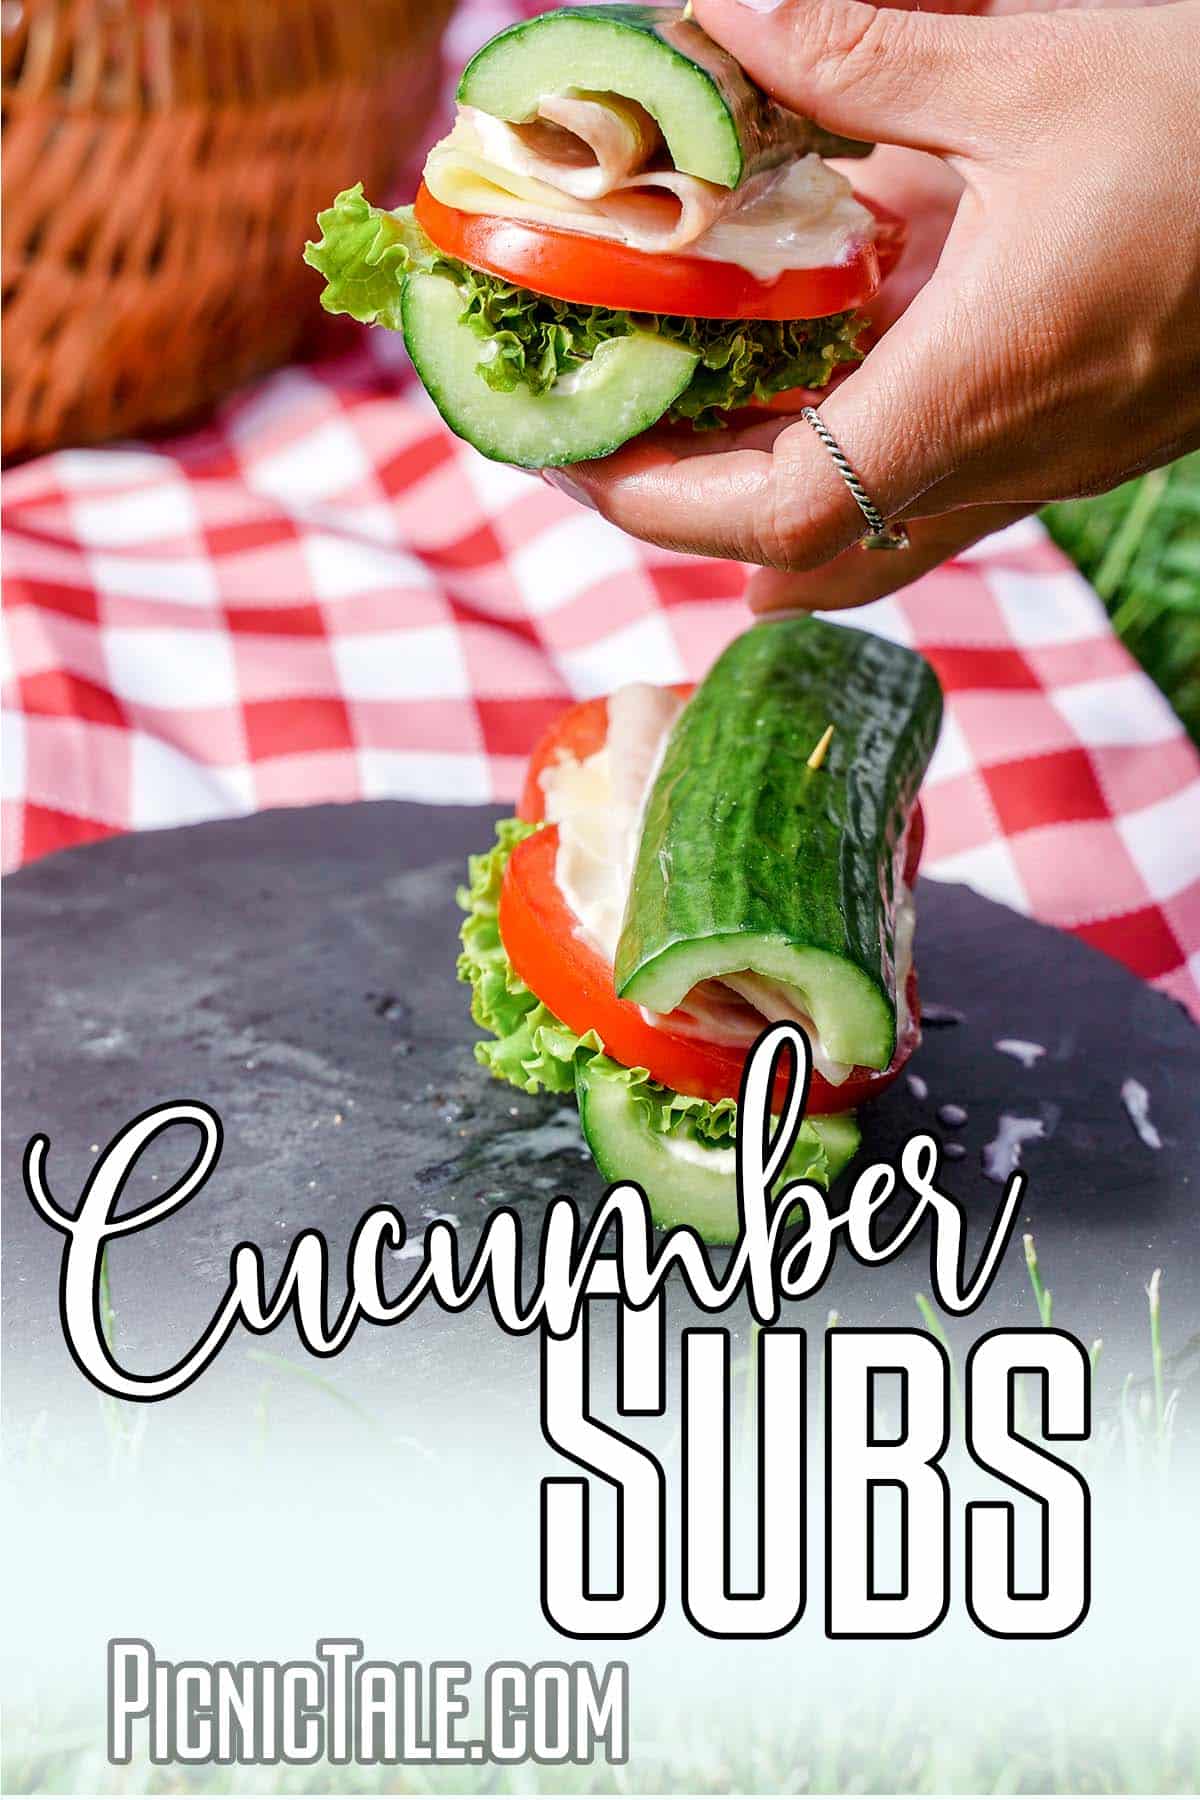 Holding Cucumber Subs outside.